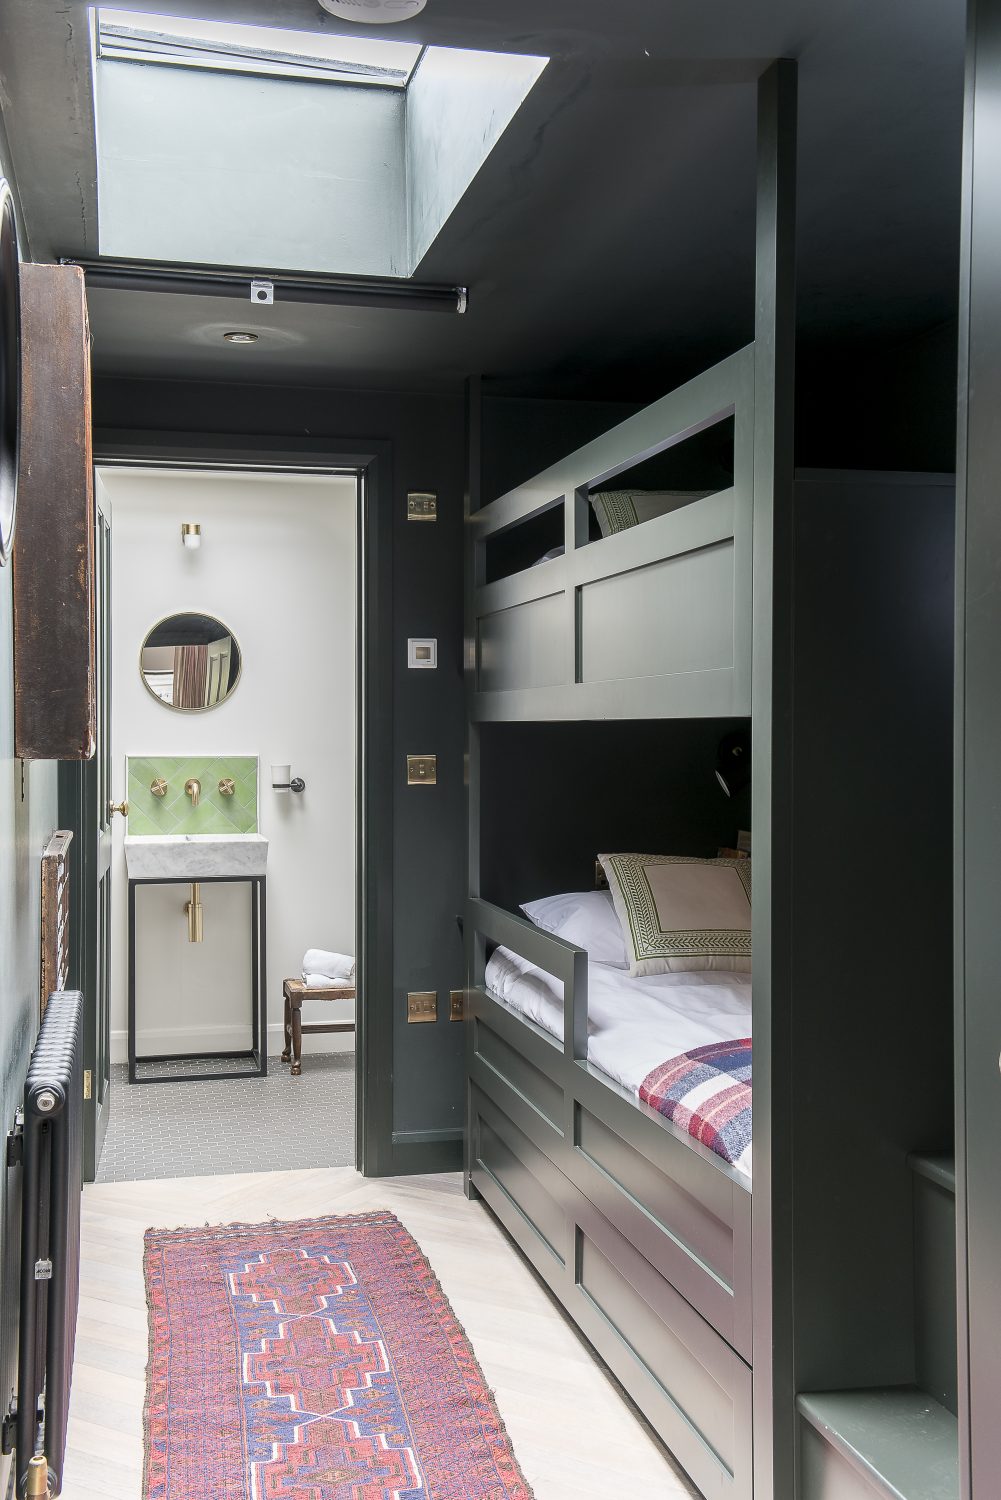 The second bedroom, with two built-in bunk beds, is painted a deep green. Guests often leave messages in an old printer’s tray, into which Amy has put some letter cubes